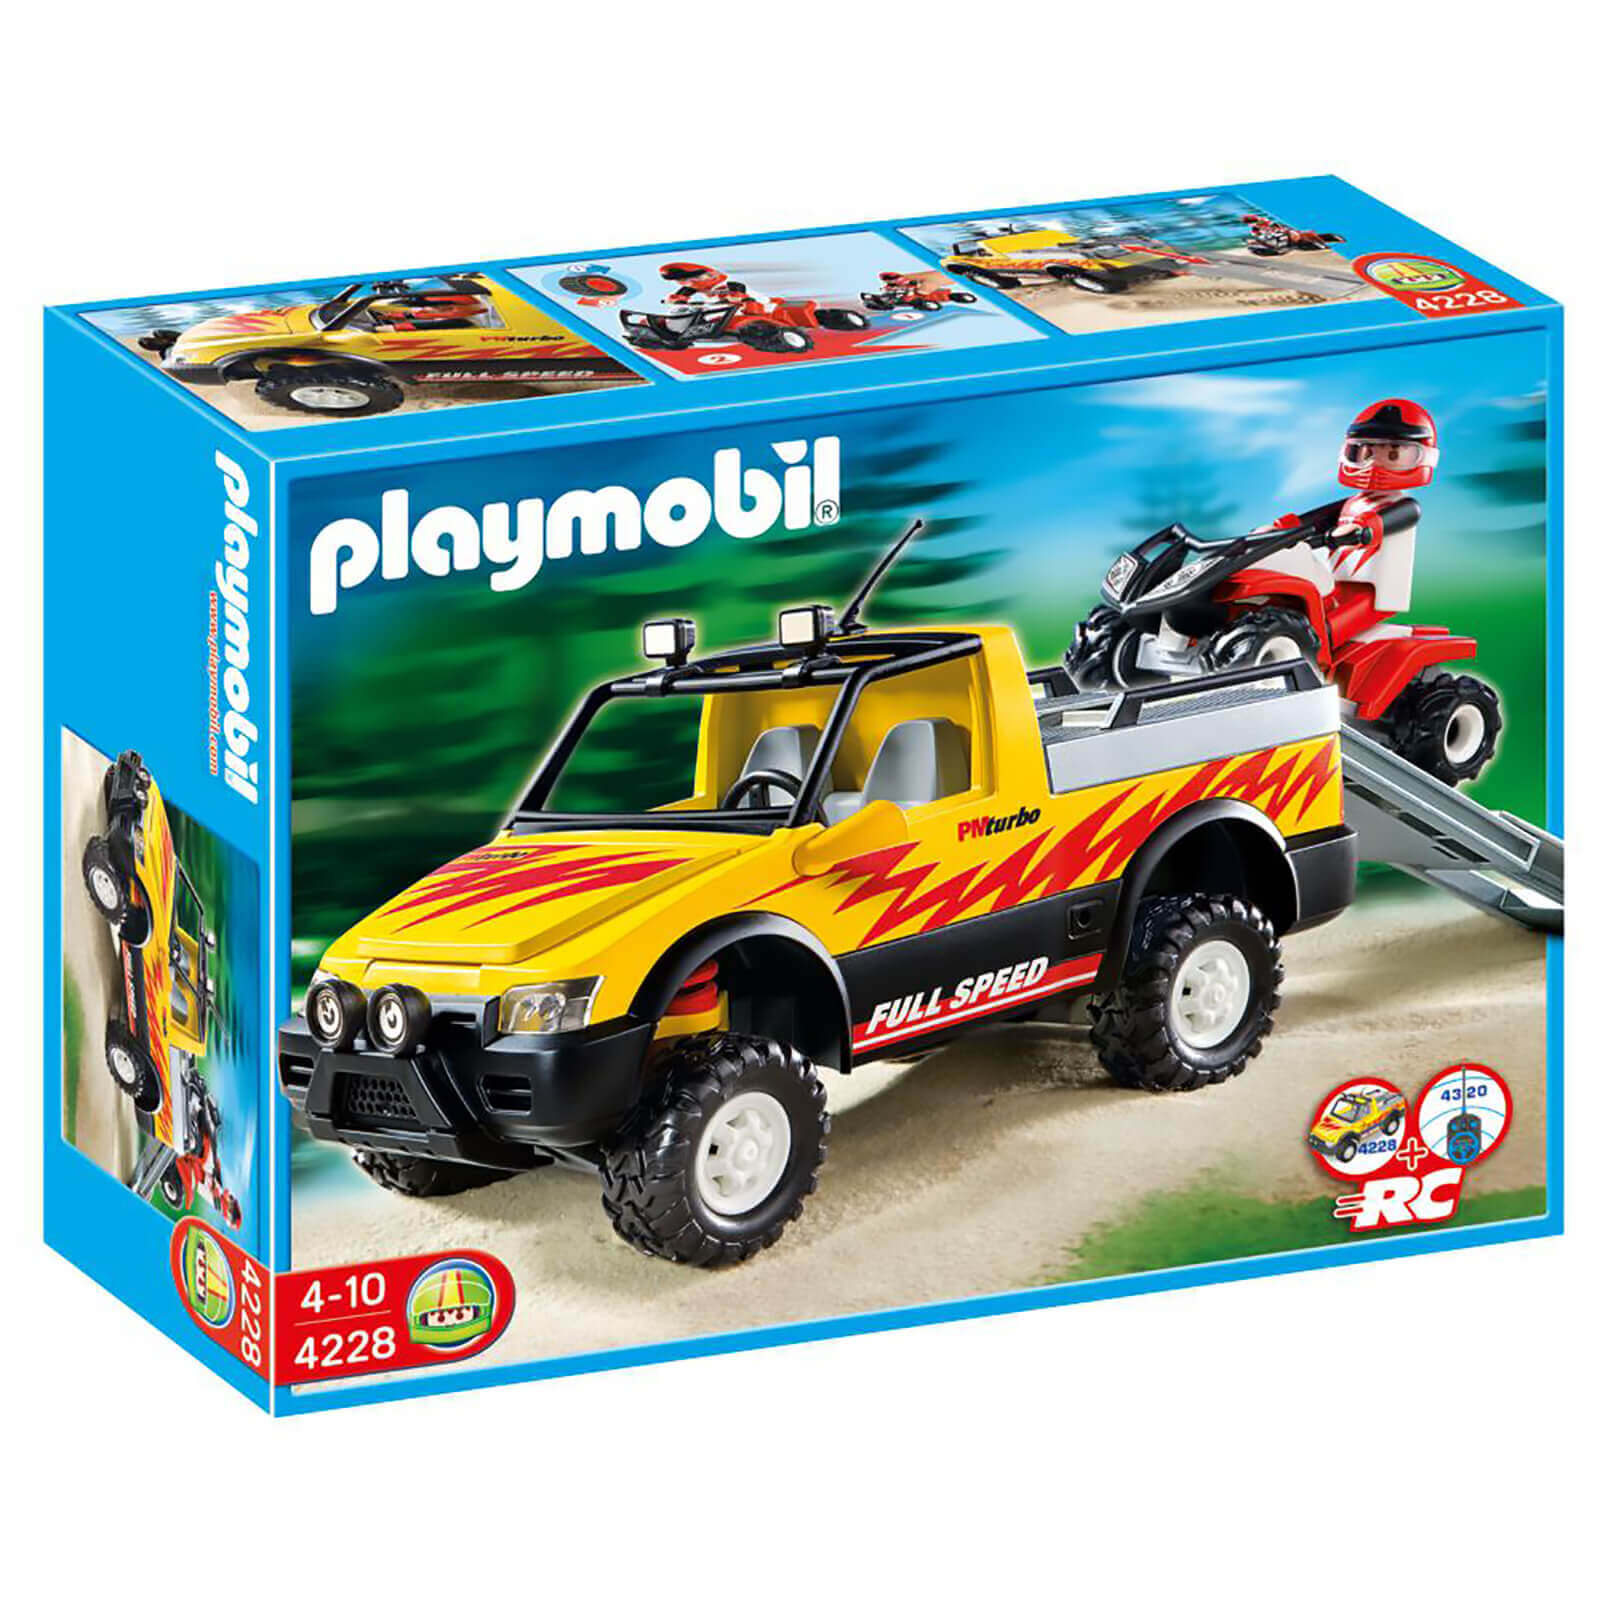 Playmobil 4x4 Pick Up With Quad (4228)